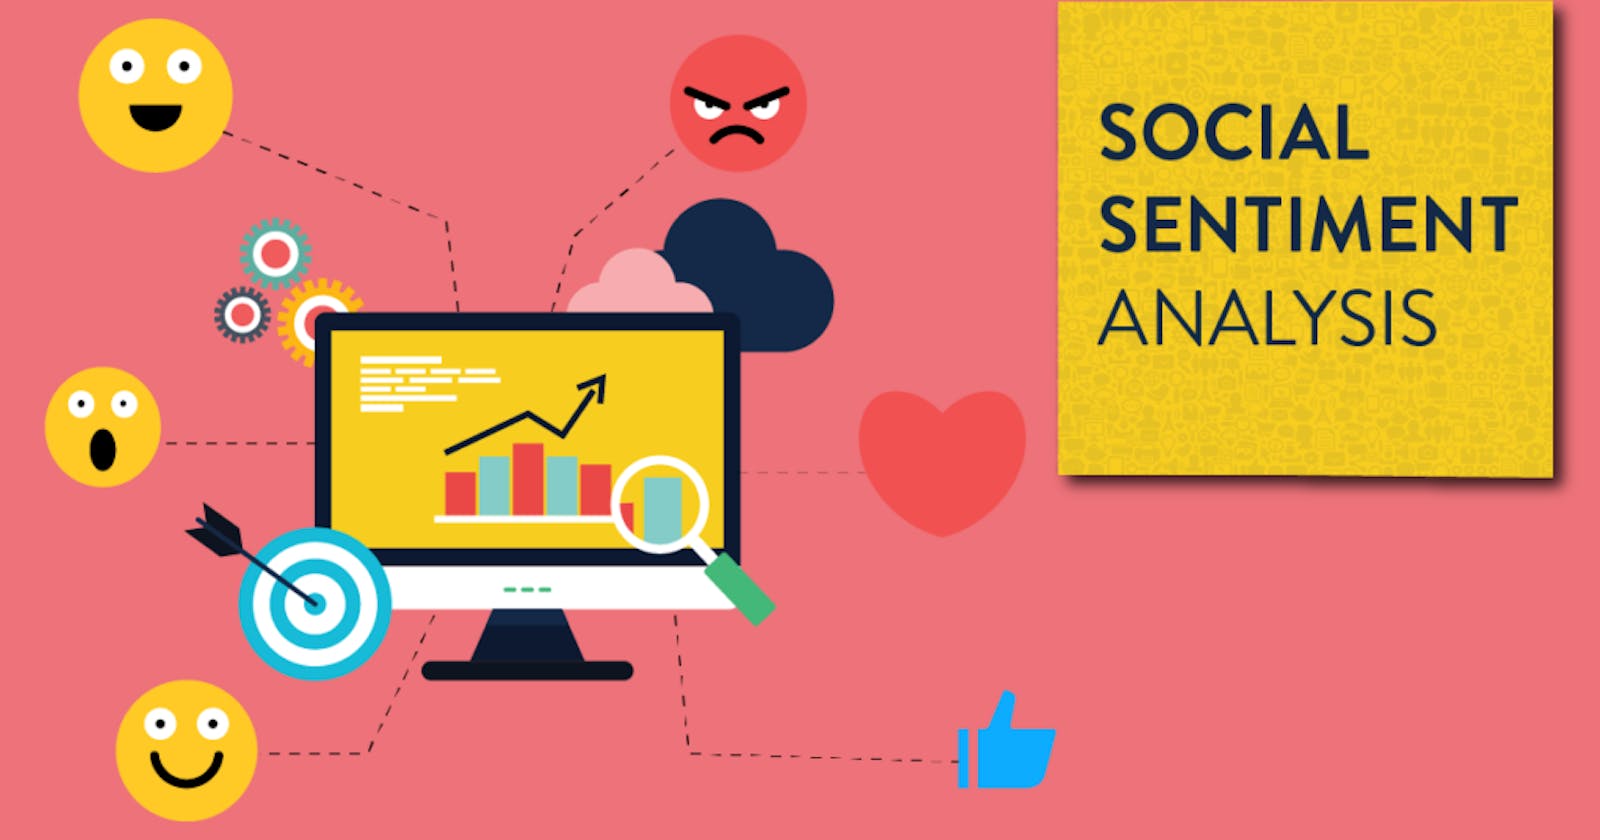 Sentiment Analysis Concept - Bitcoin Sentiment Analysis Using Python and Twitter